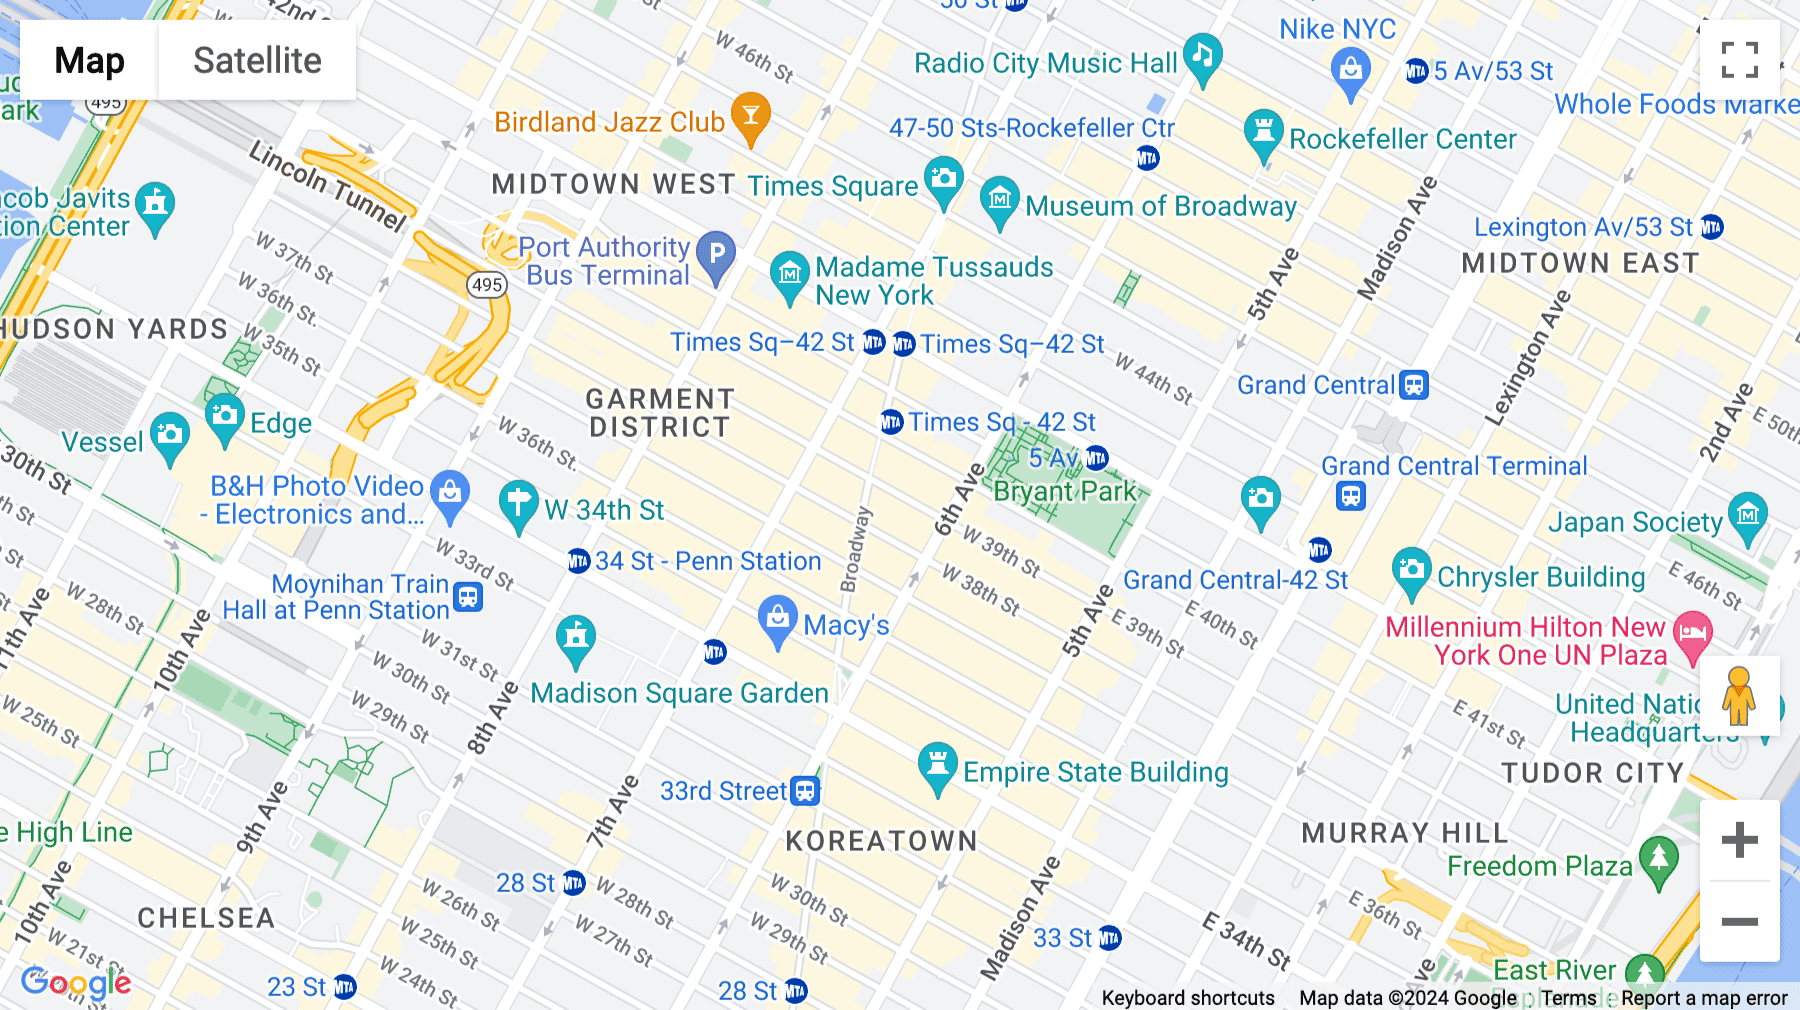 Click for interative map of 1410 Broadway, Manhattan, New York, New York City